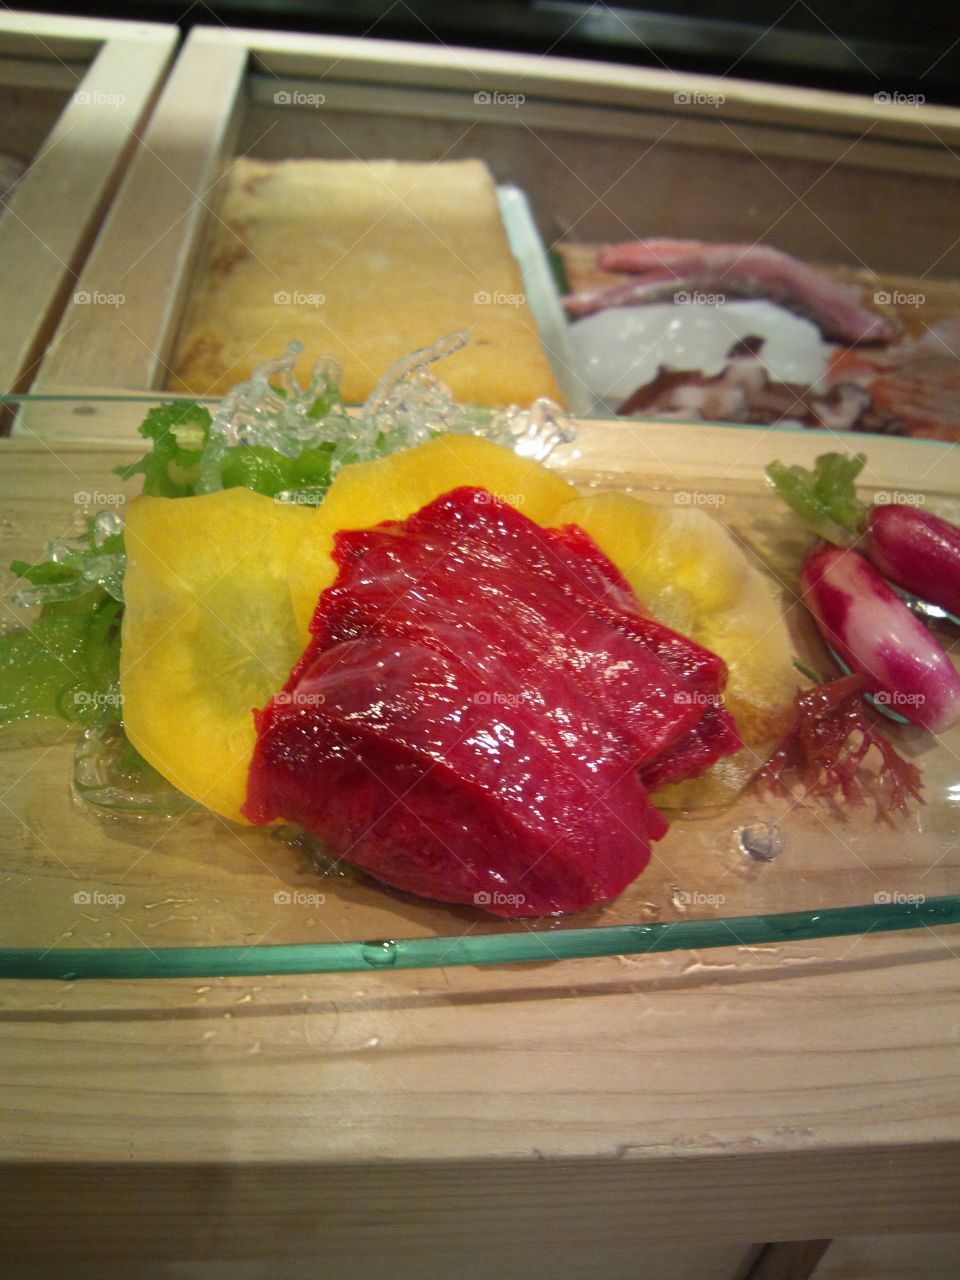 this is heart of shark. it is really rare to eat this, so it was first time and it will be last time.